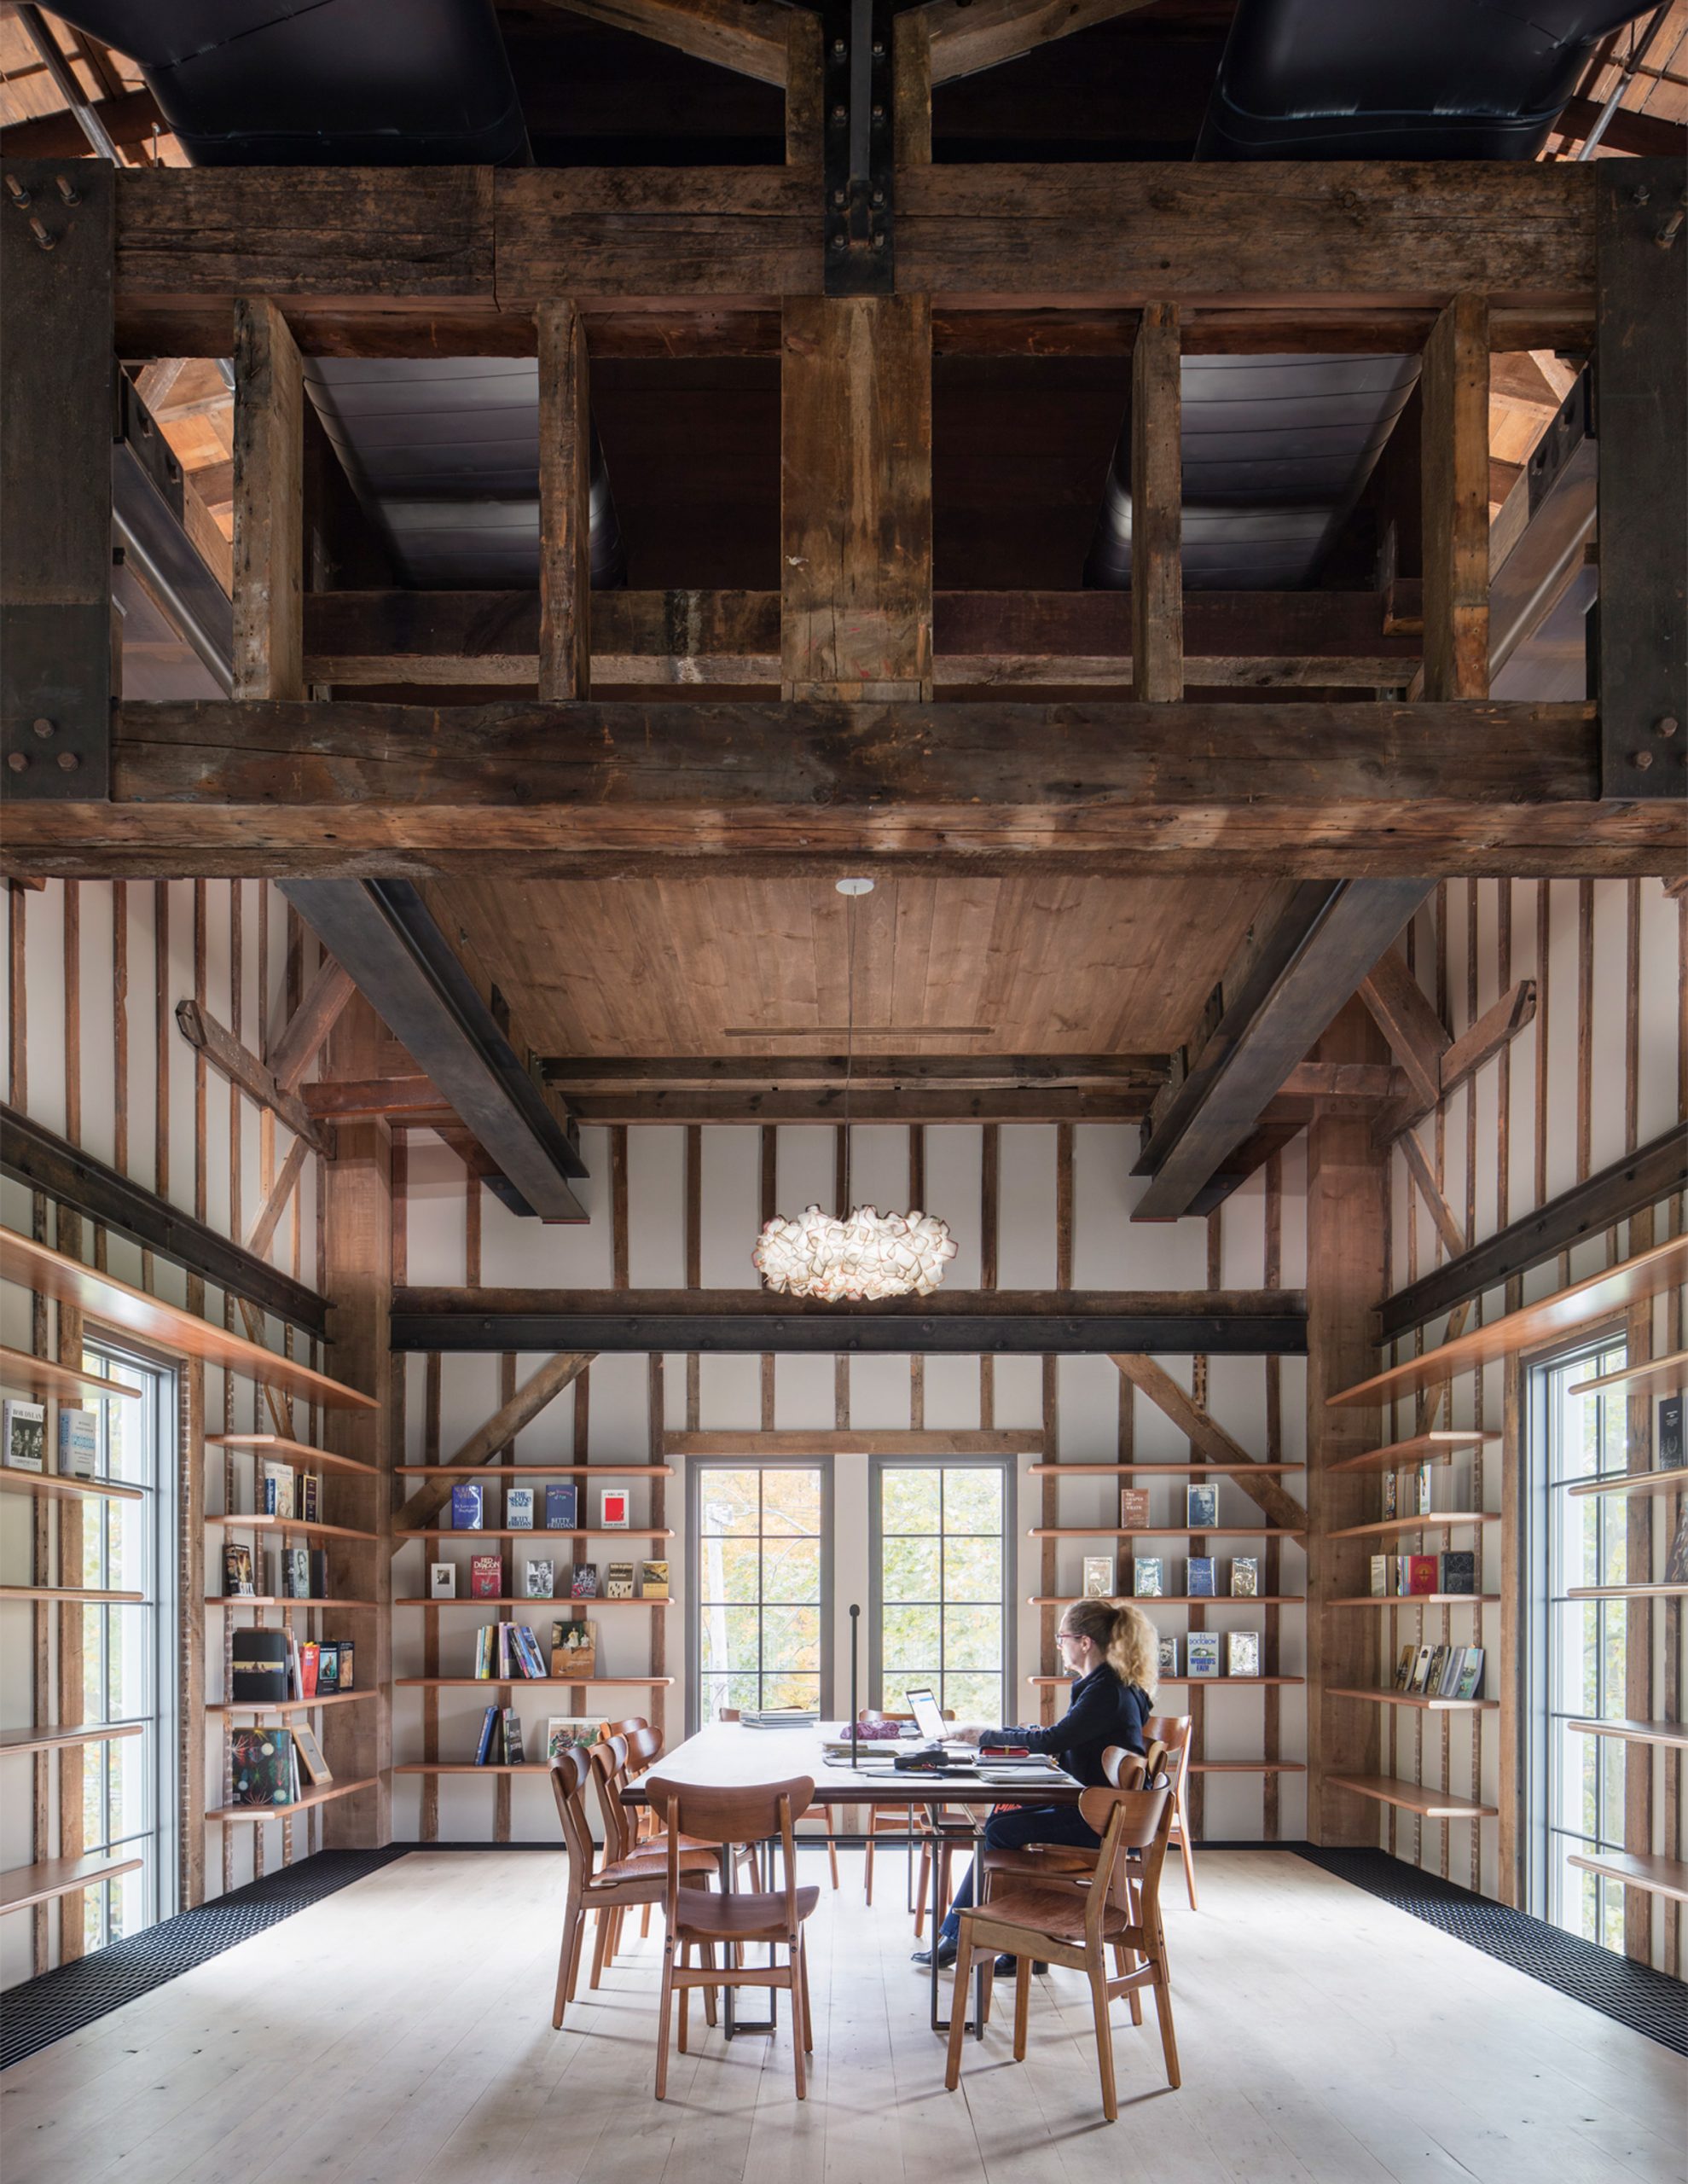 Interiors of converted church in the Hamptons